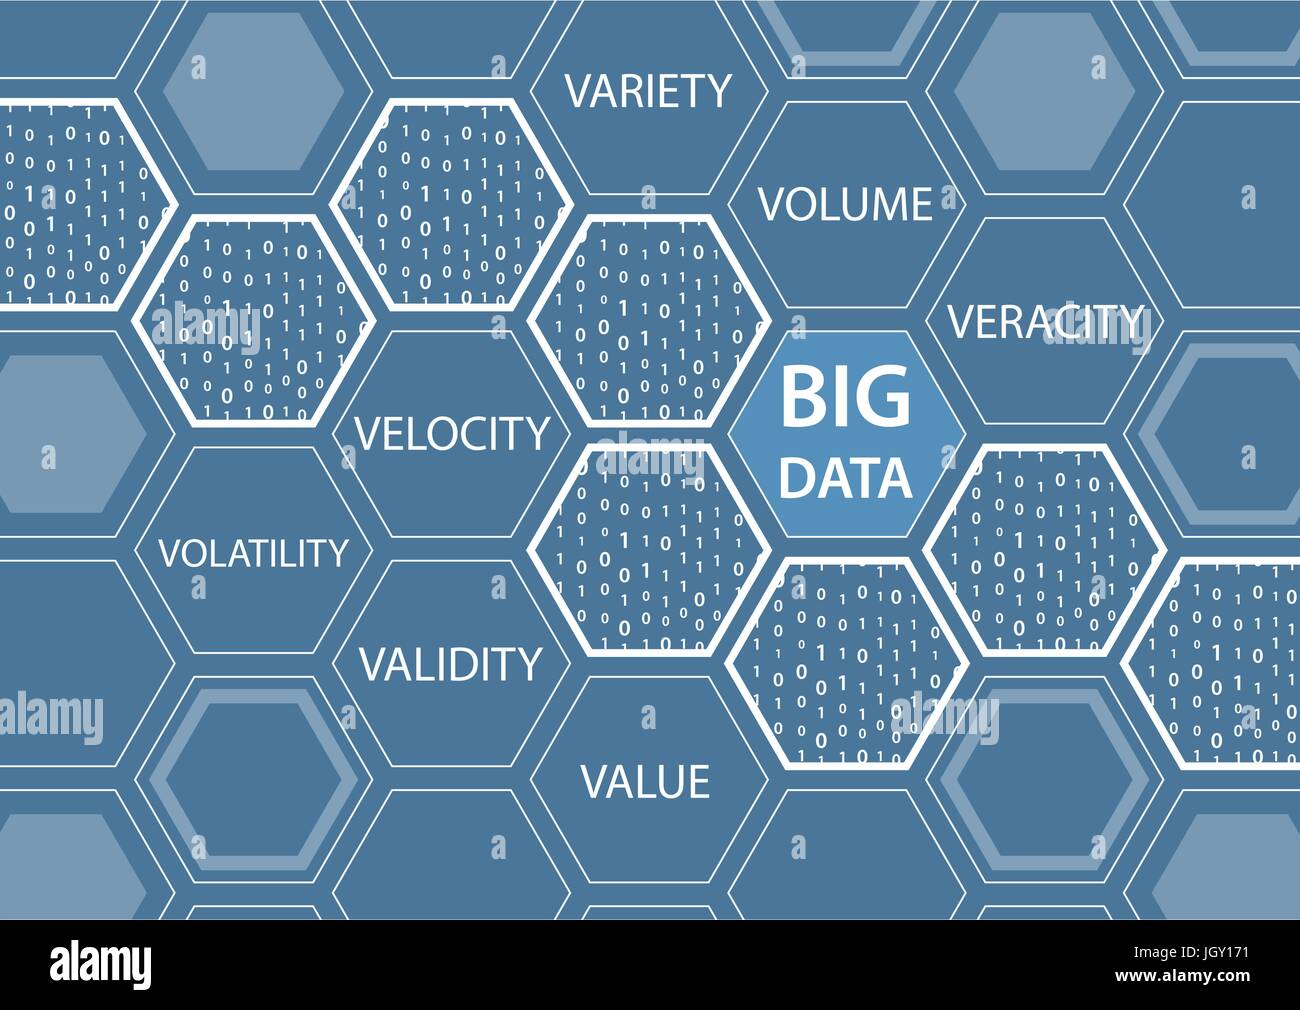 Big Data vector background with hexagon shapes and the words variety, volume, veracity, velocity, volatility, value, validity. Stock Vector